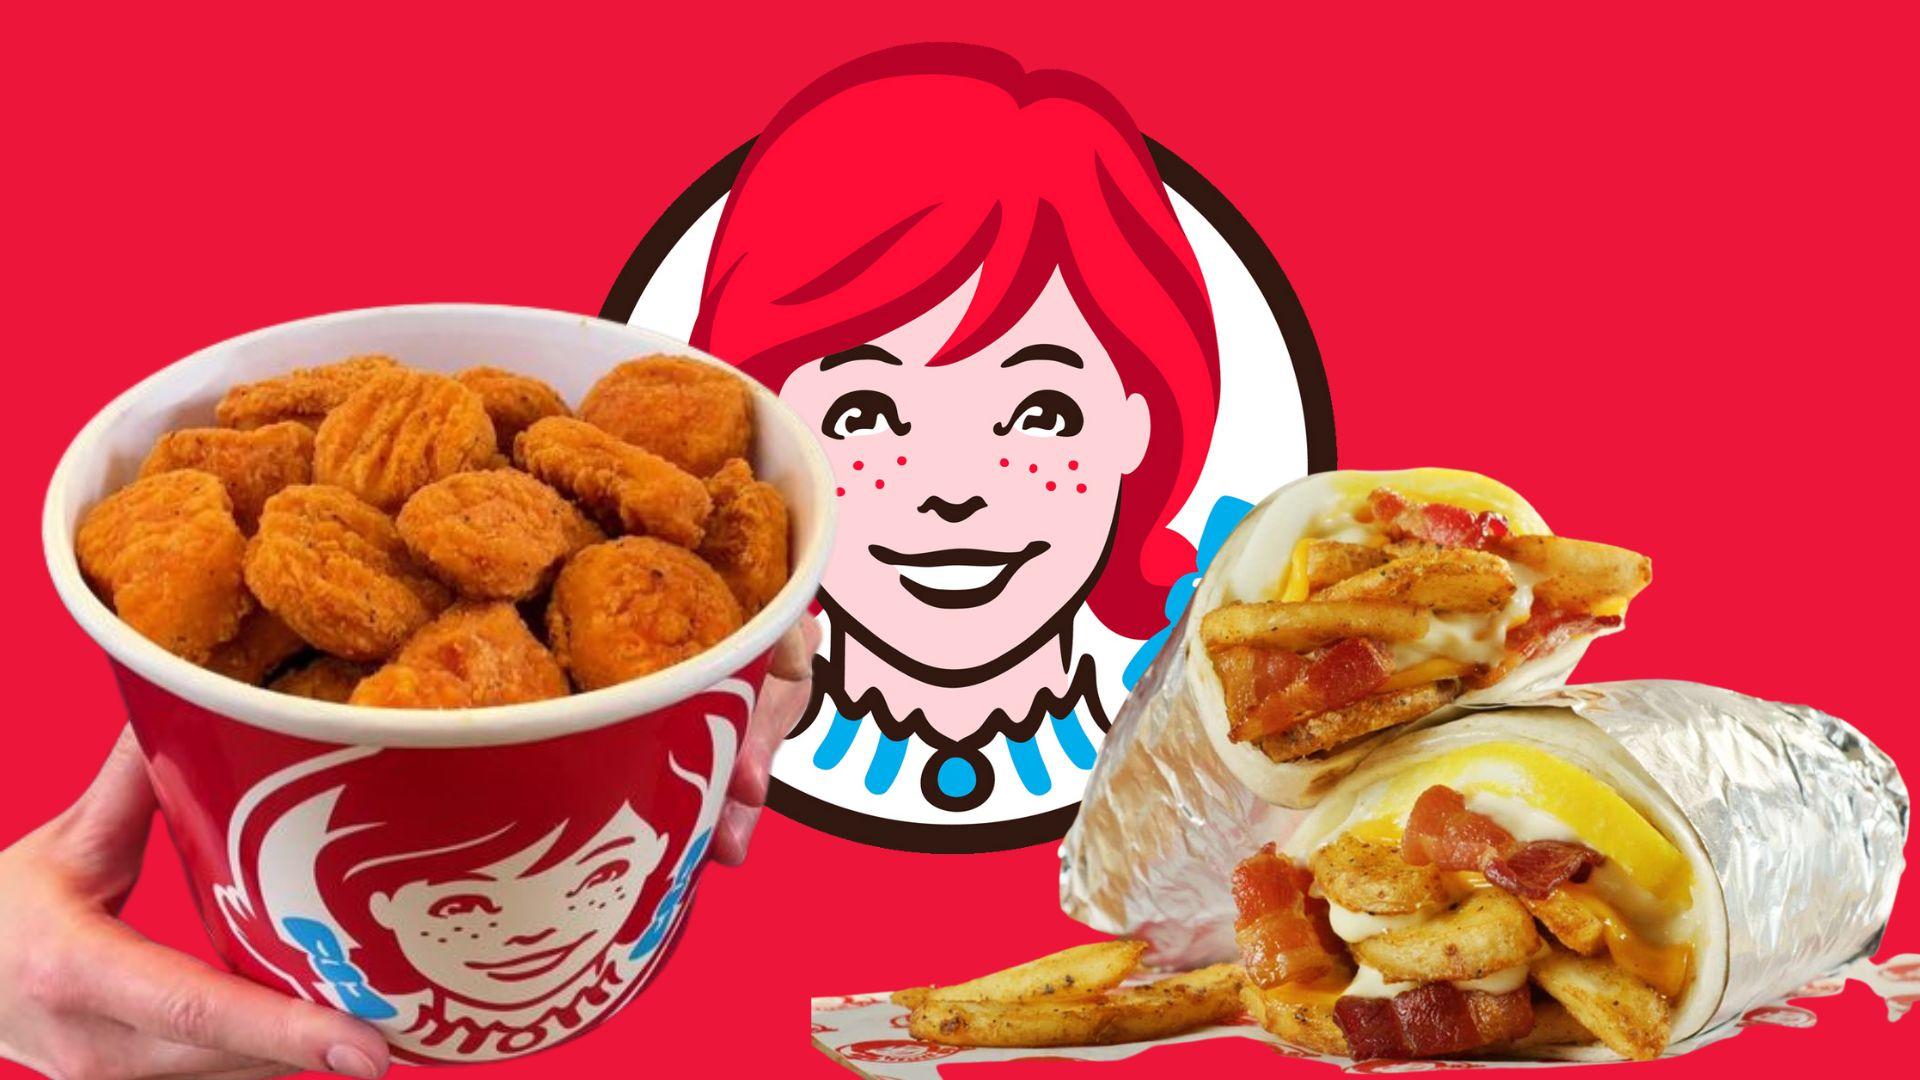 Wendy's logo and new menu items